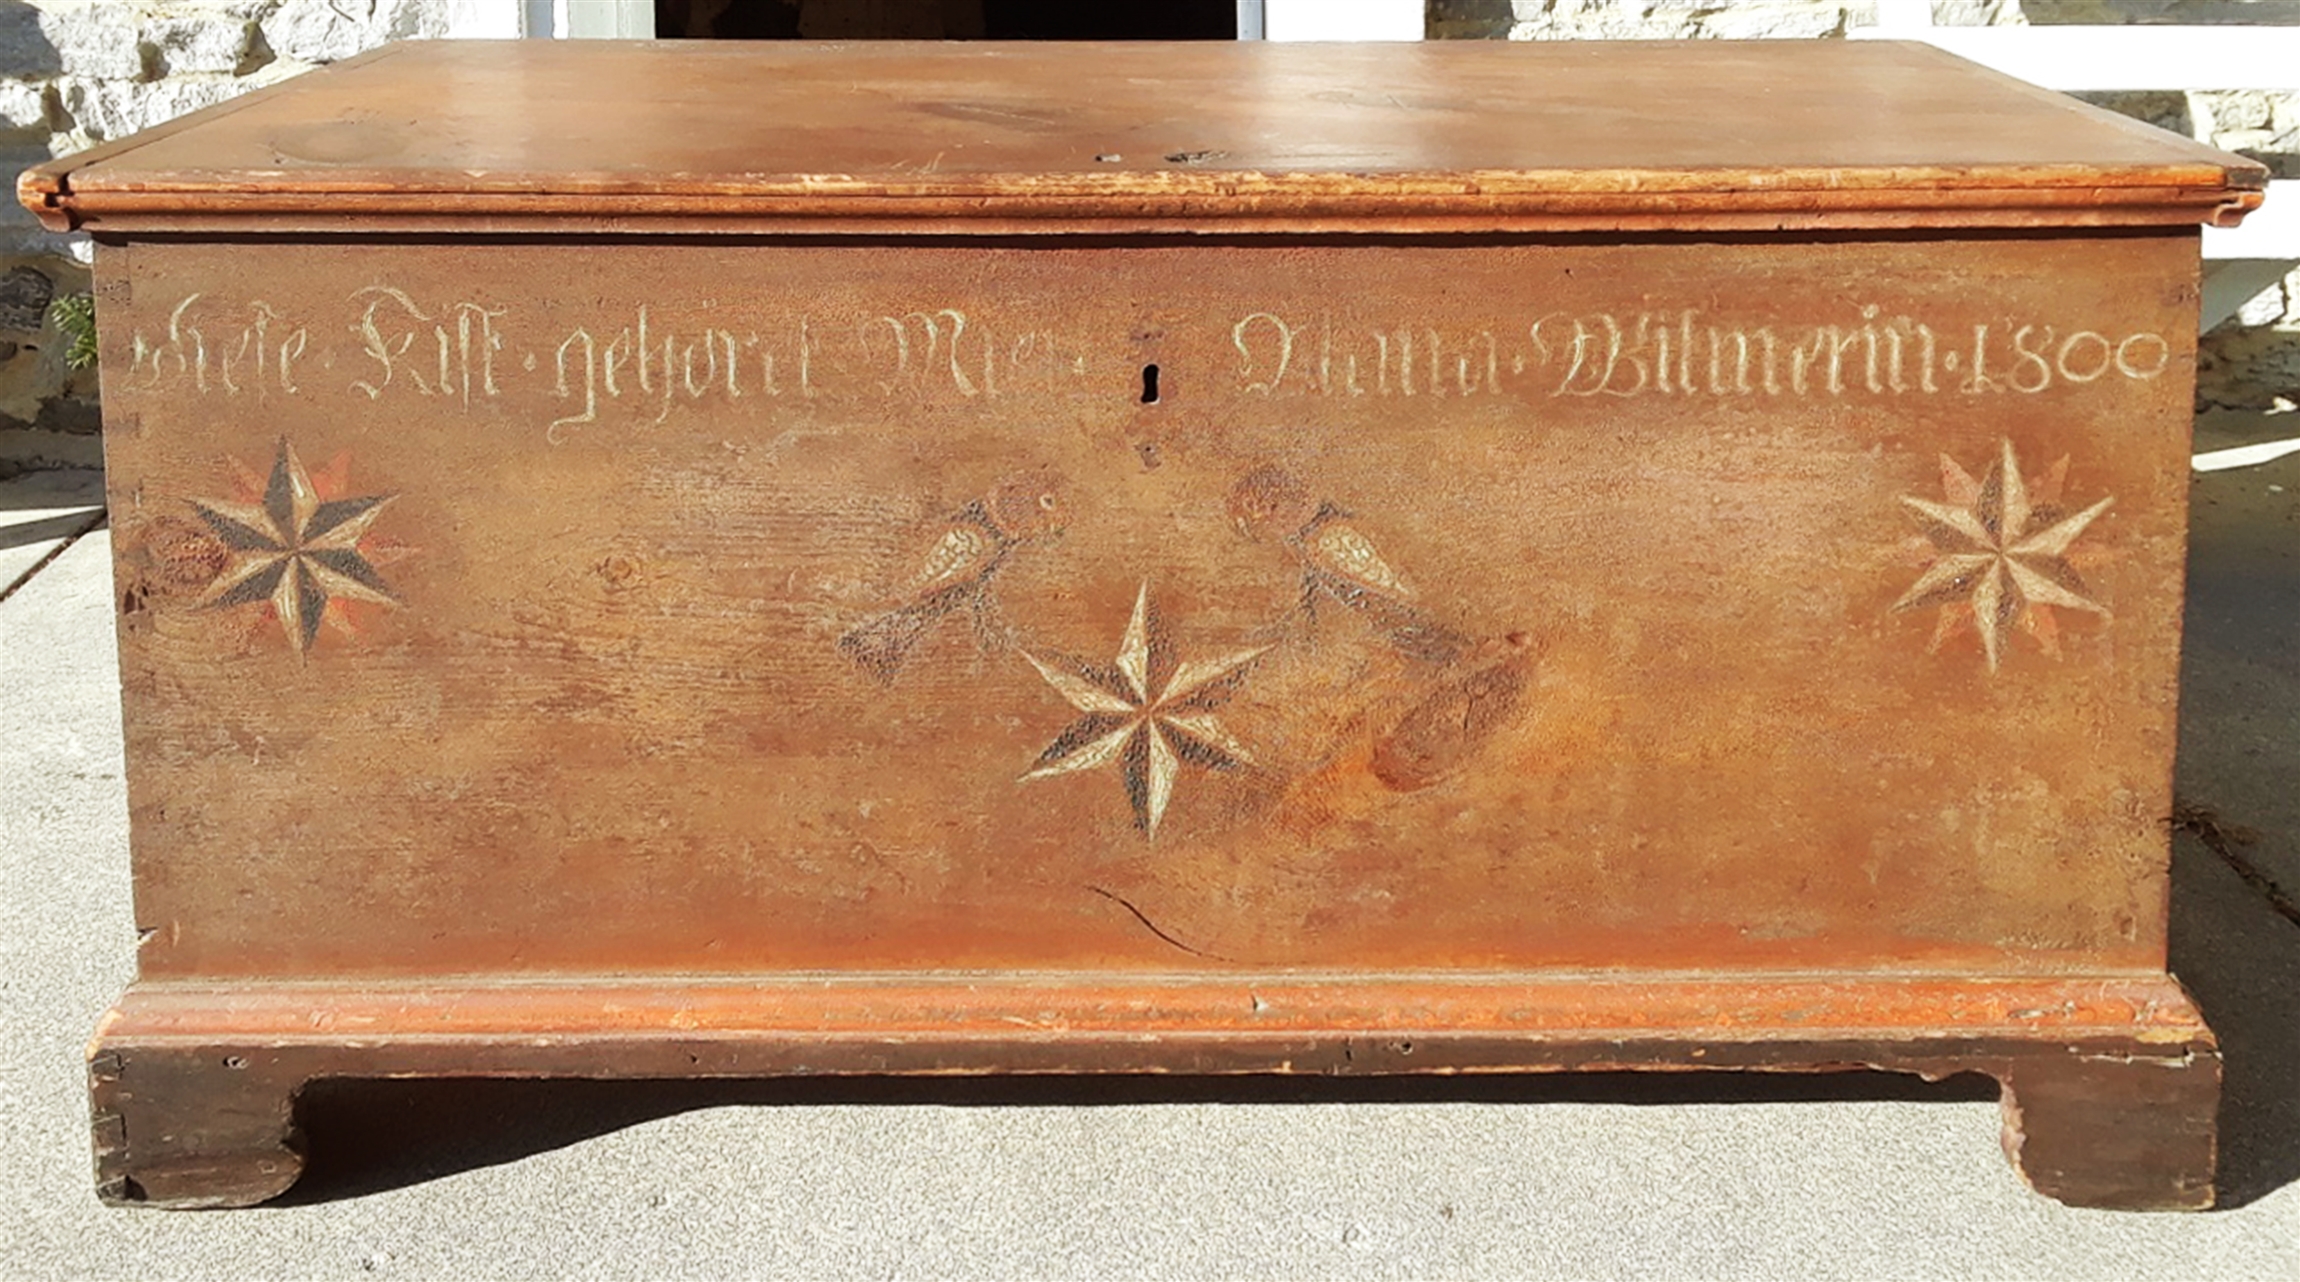 A large brown chest with two parrots, three geometric stars, and German script.